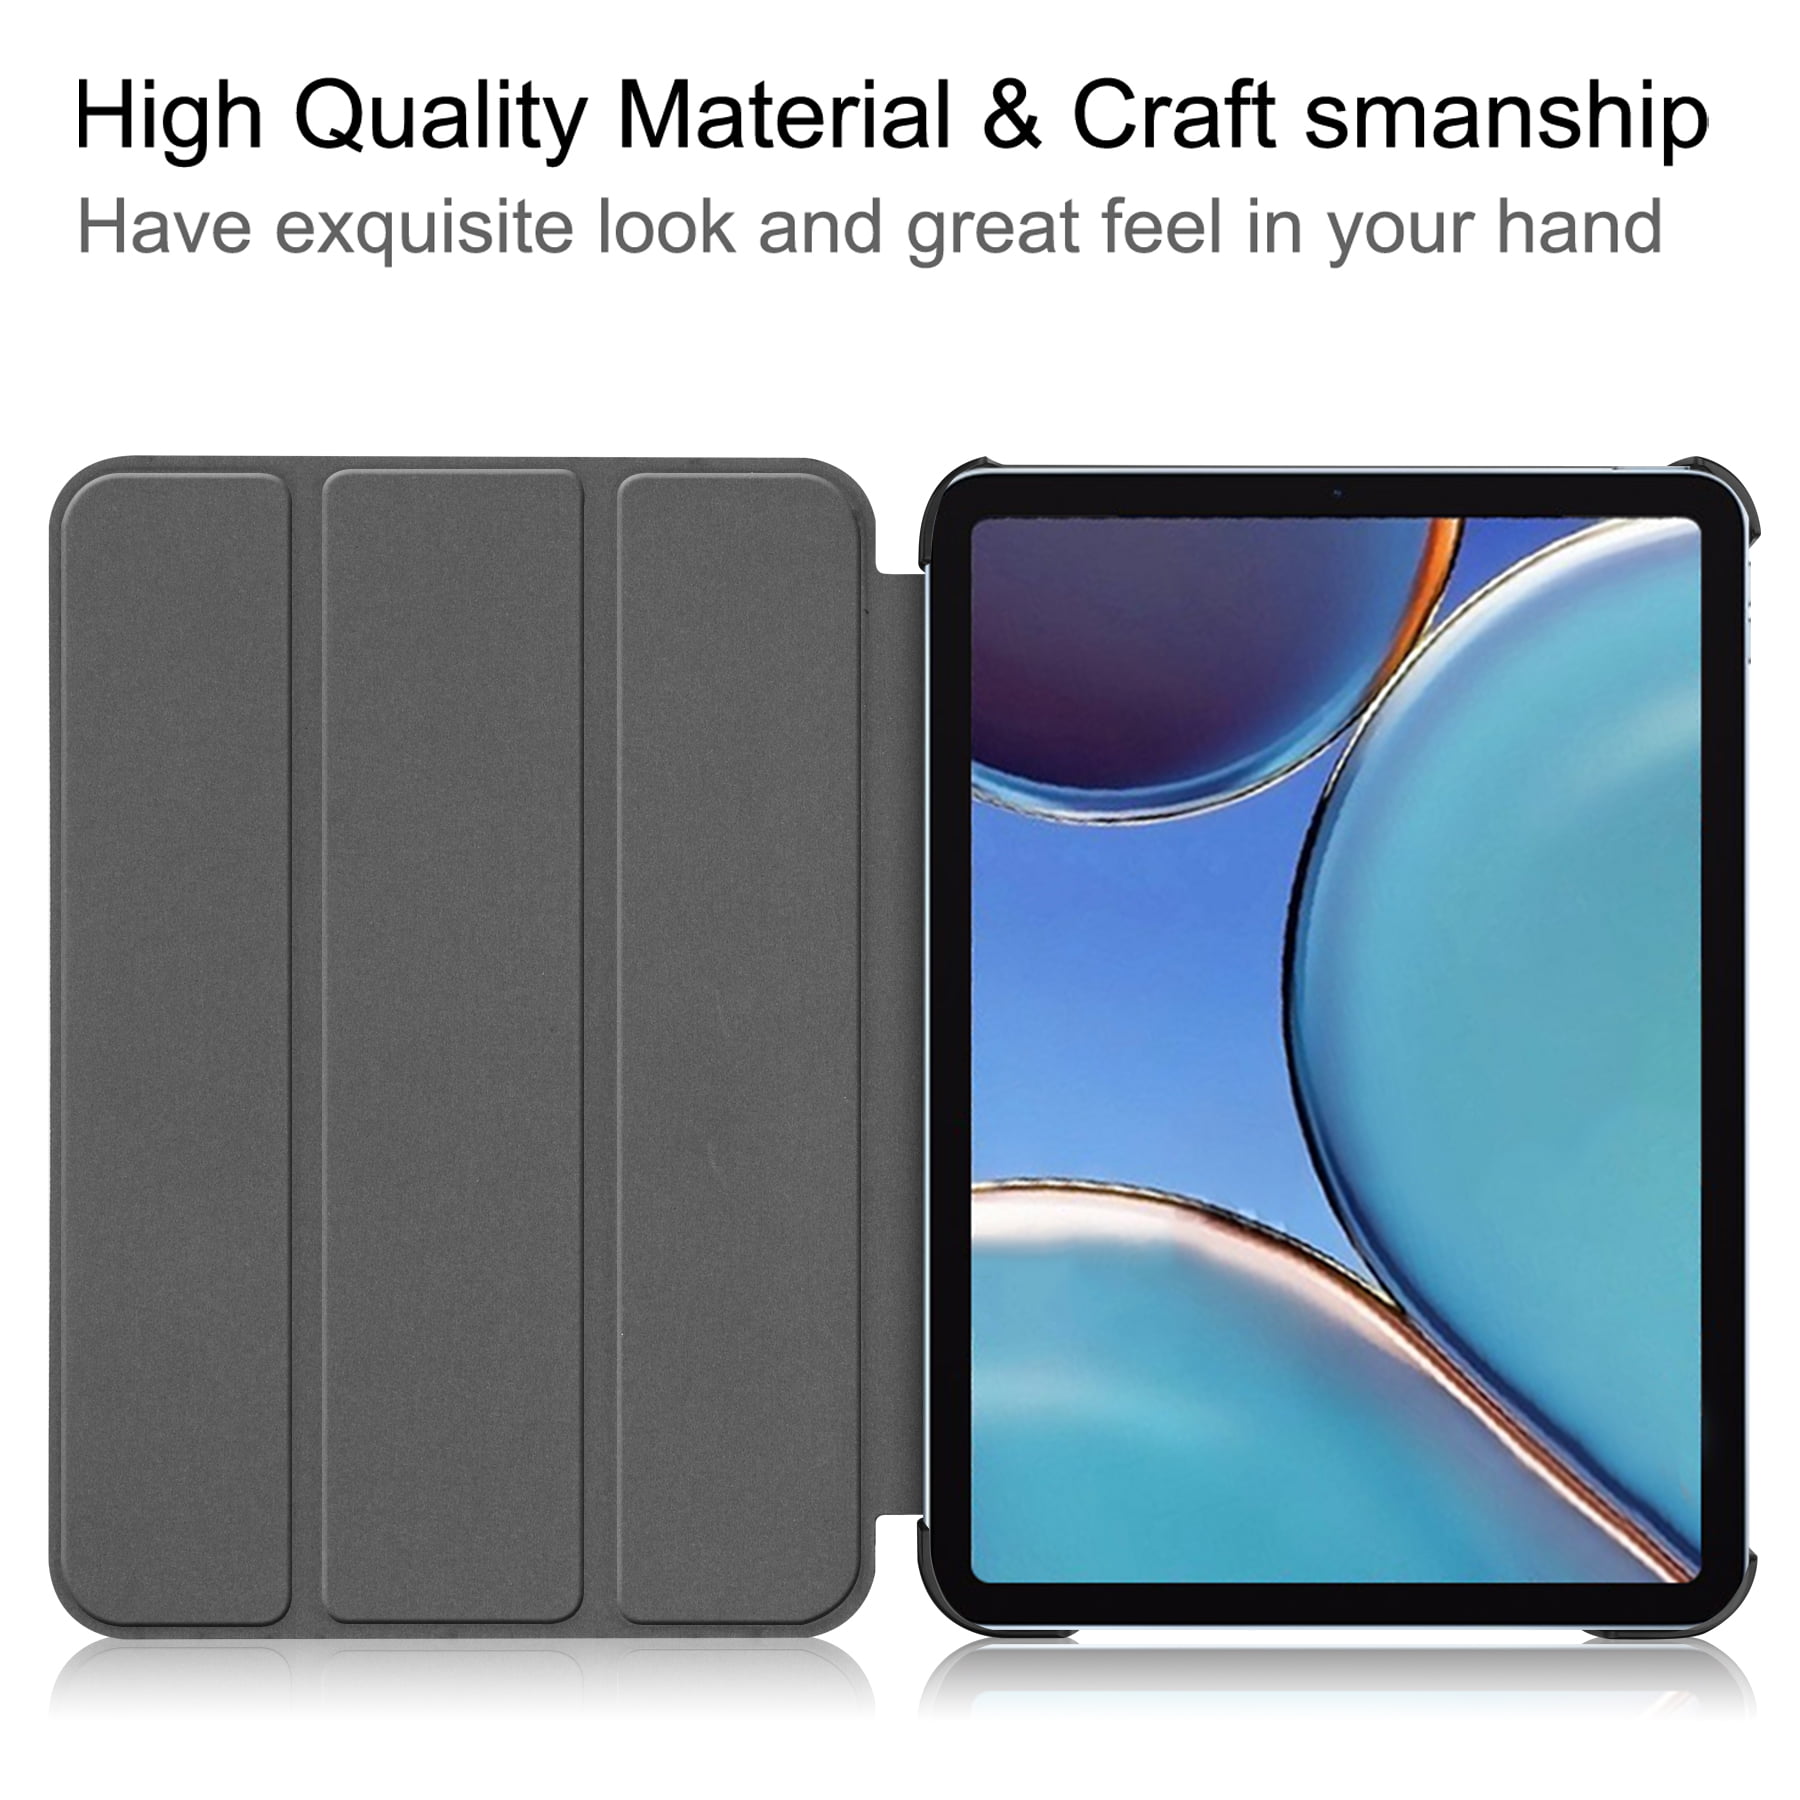 iPad Mini 6th Generation Cases 8.3 Inch, TechCode Lightweight Book Cover  Designer Folio PU Leather Slim Protective Stand Case with ID Holder & Card